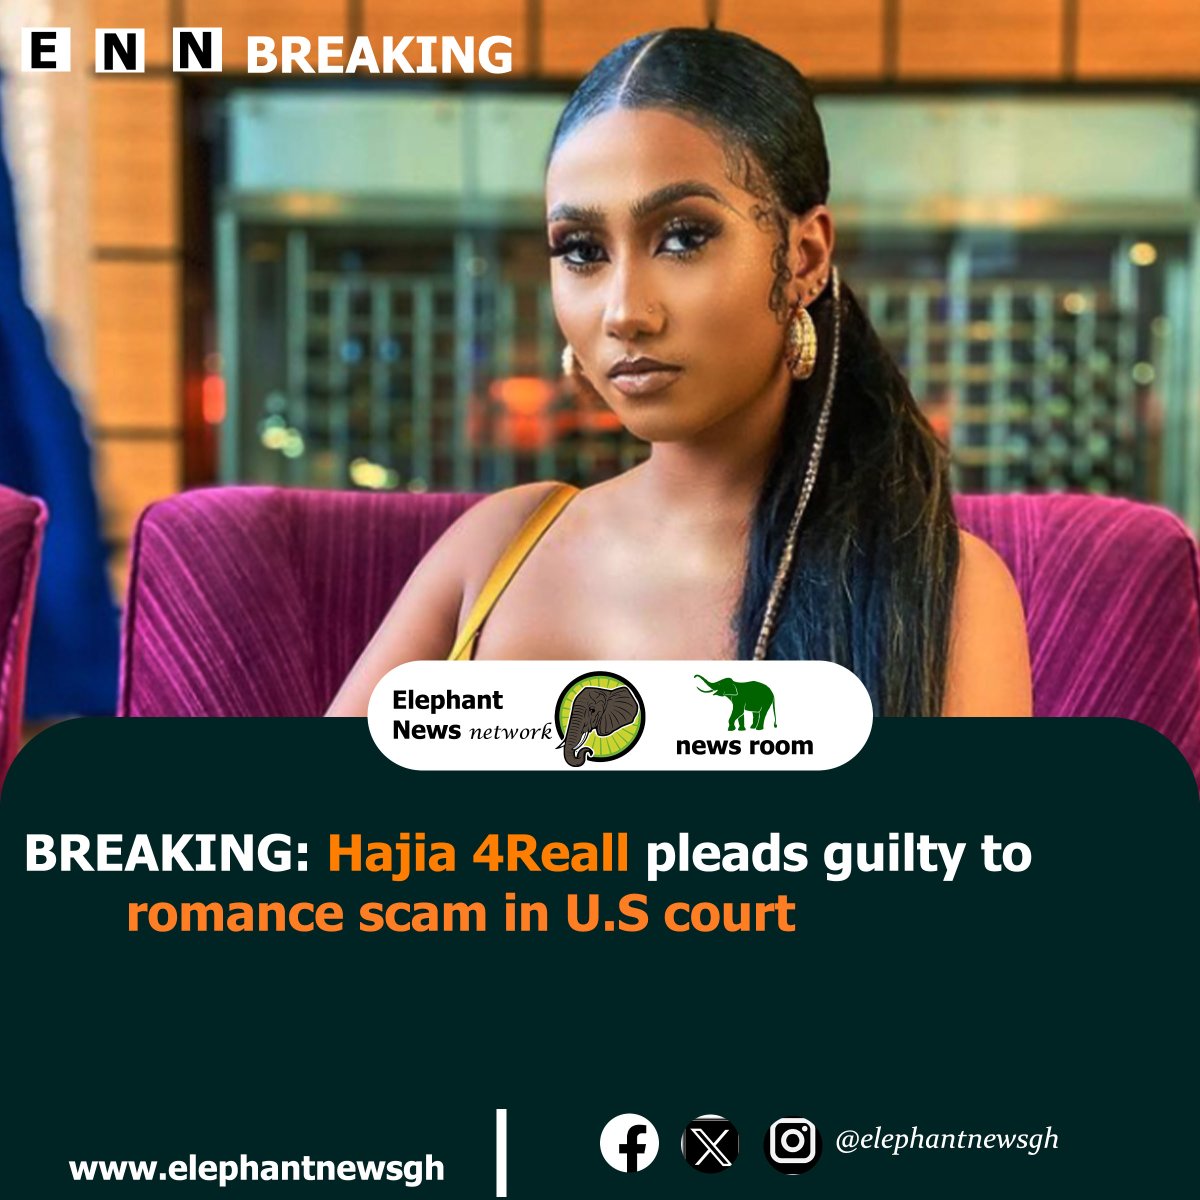 Hajia 4 Reall pleads guilty to romance scam involvement, agrees to pay over $2 million in forfeiture and restitution. Scheduled for sentencing soon. #Hajia4Reall #RomanceScam #GuiltyPlea